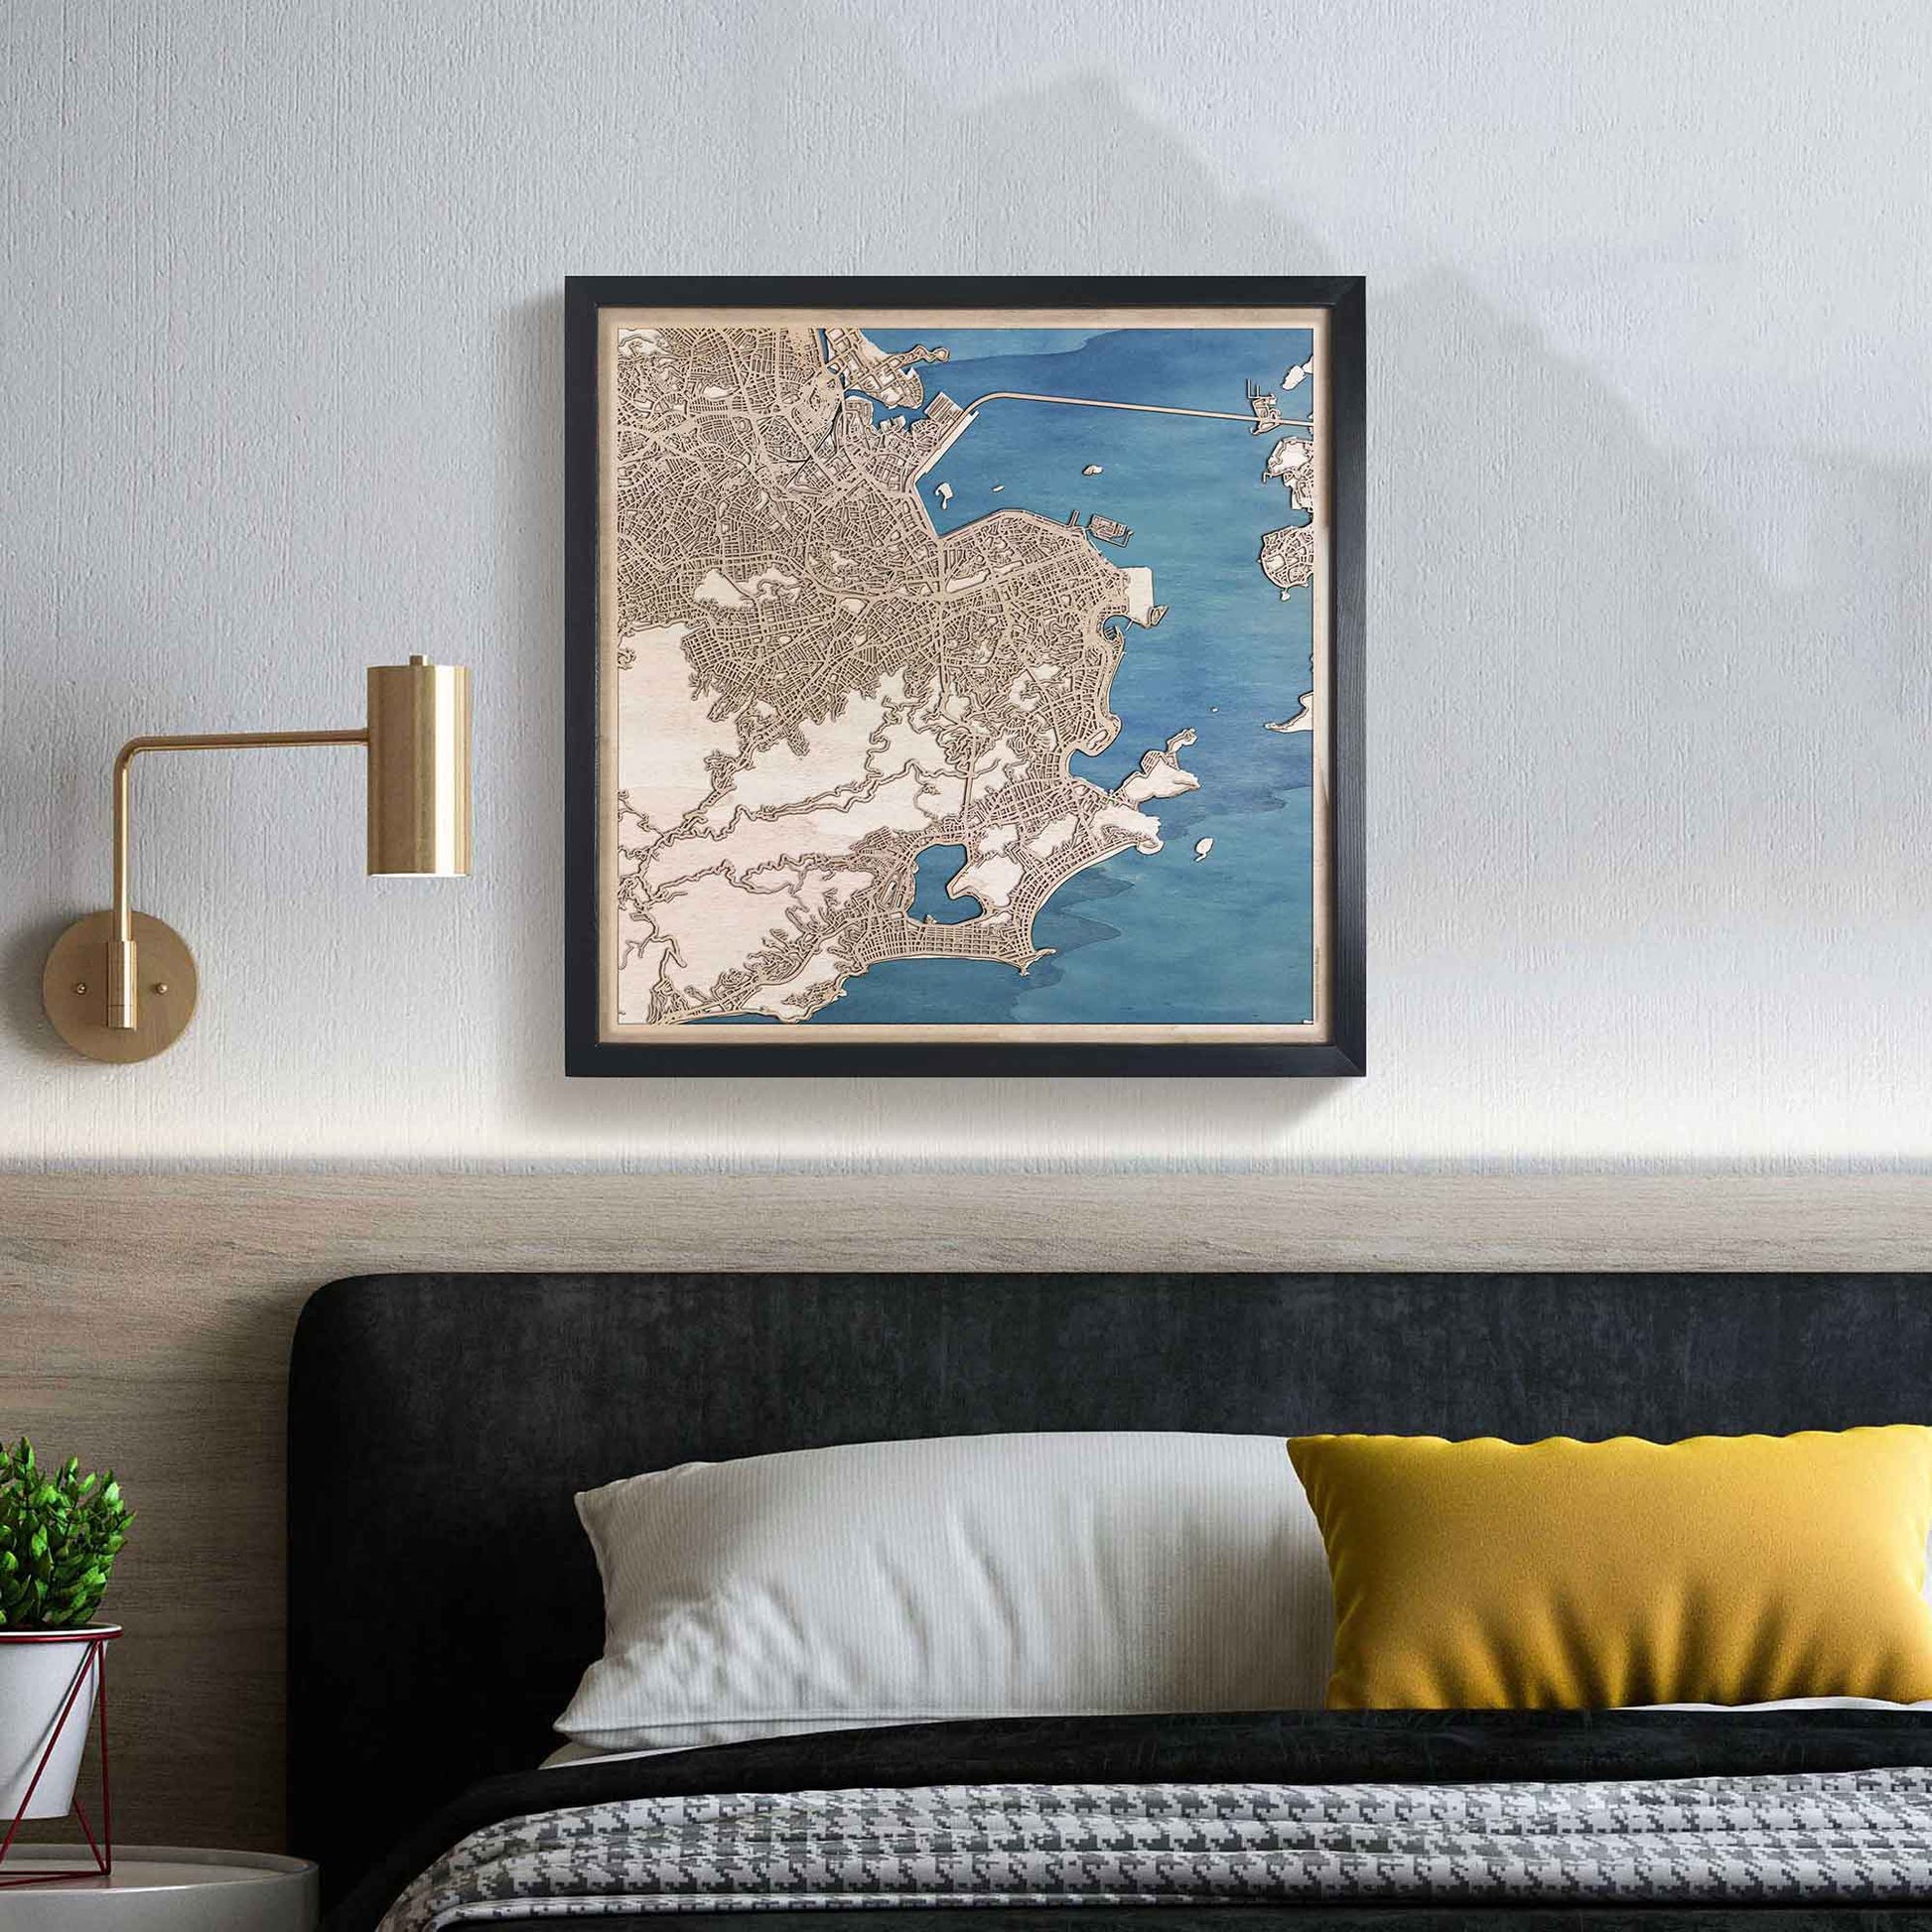 Rio de Janeiro Wooden Map by CityWood - Custom Wood Map Art - Unique Laser Cut Engraved - Anniversary Gift